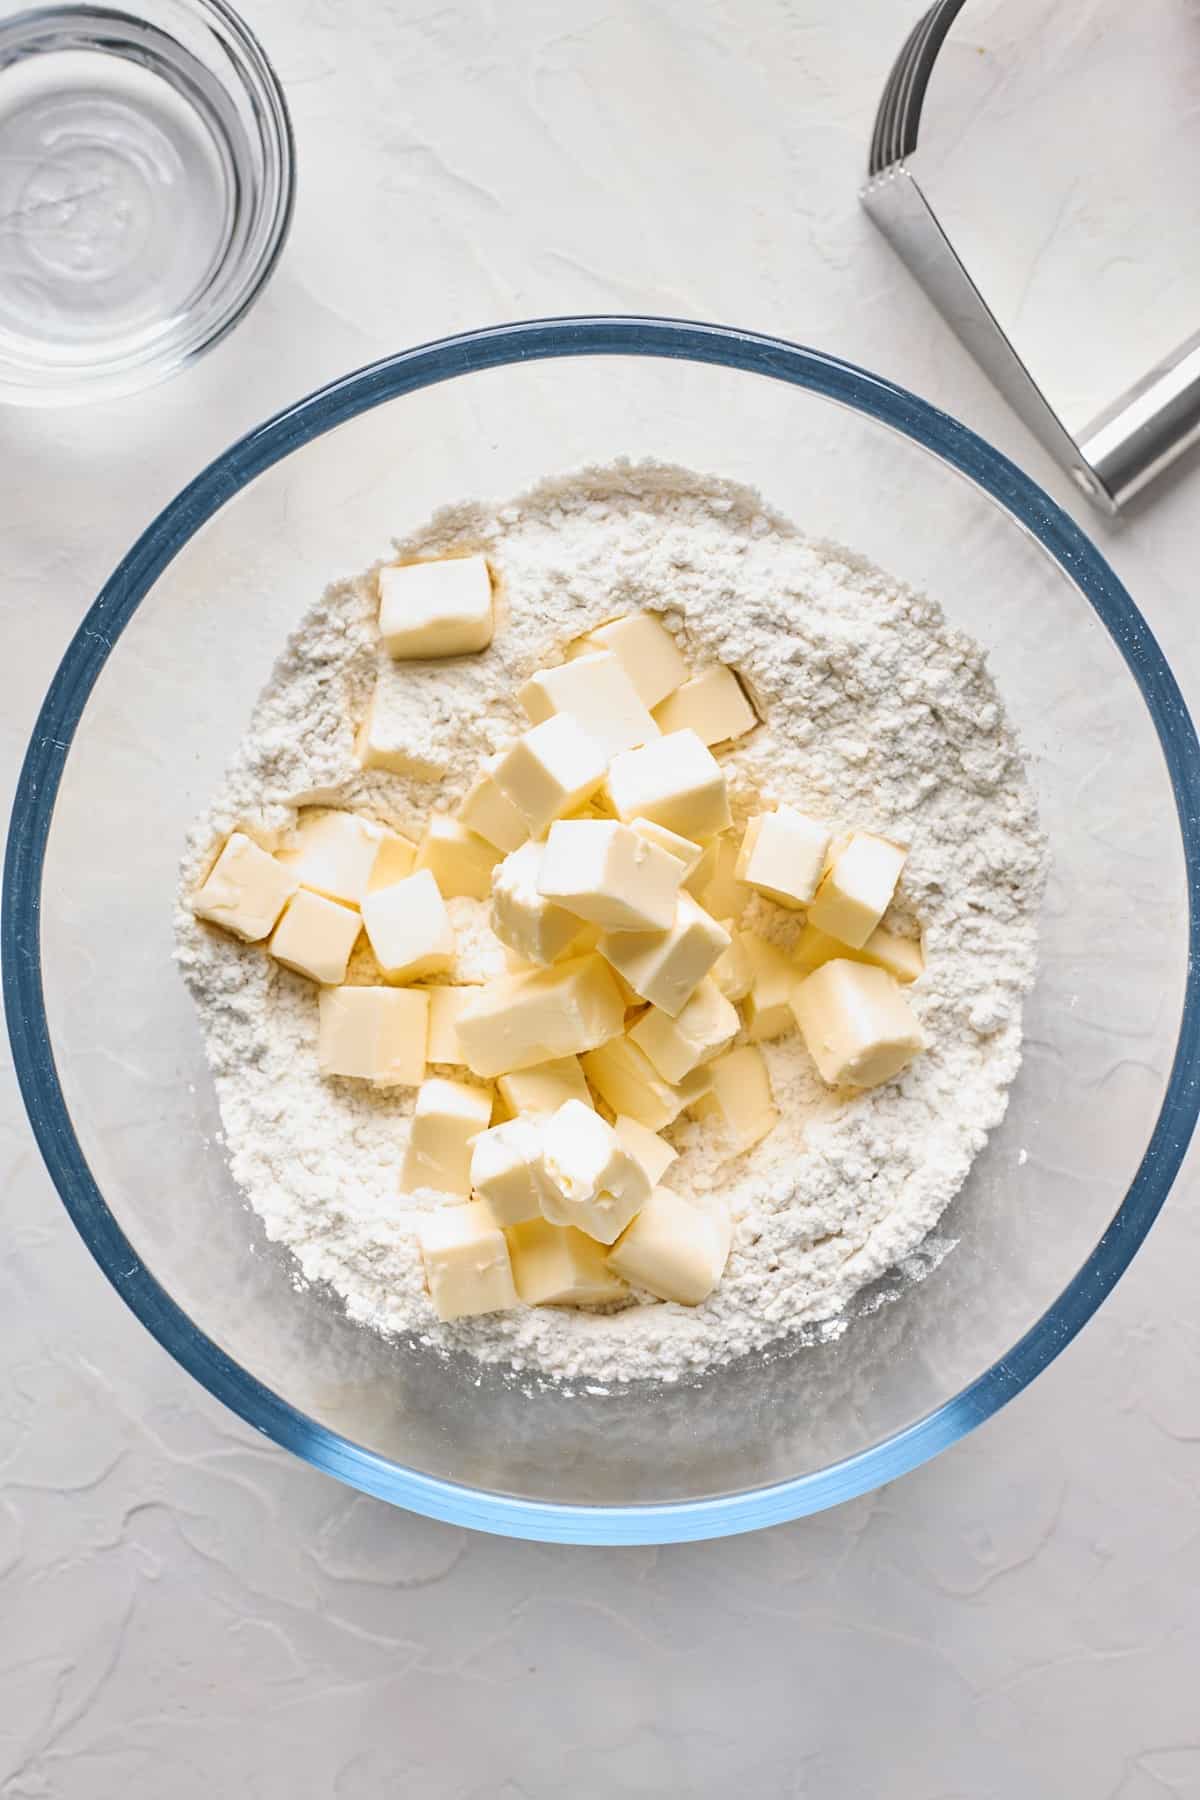 Cut up butter in a mixing bowl of flour for pie crust.